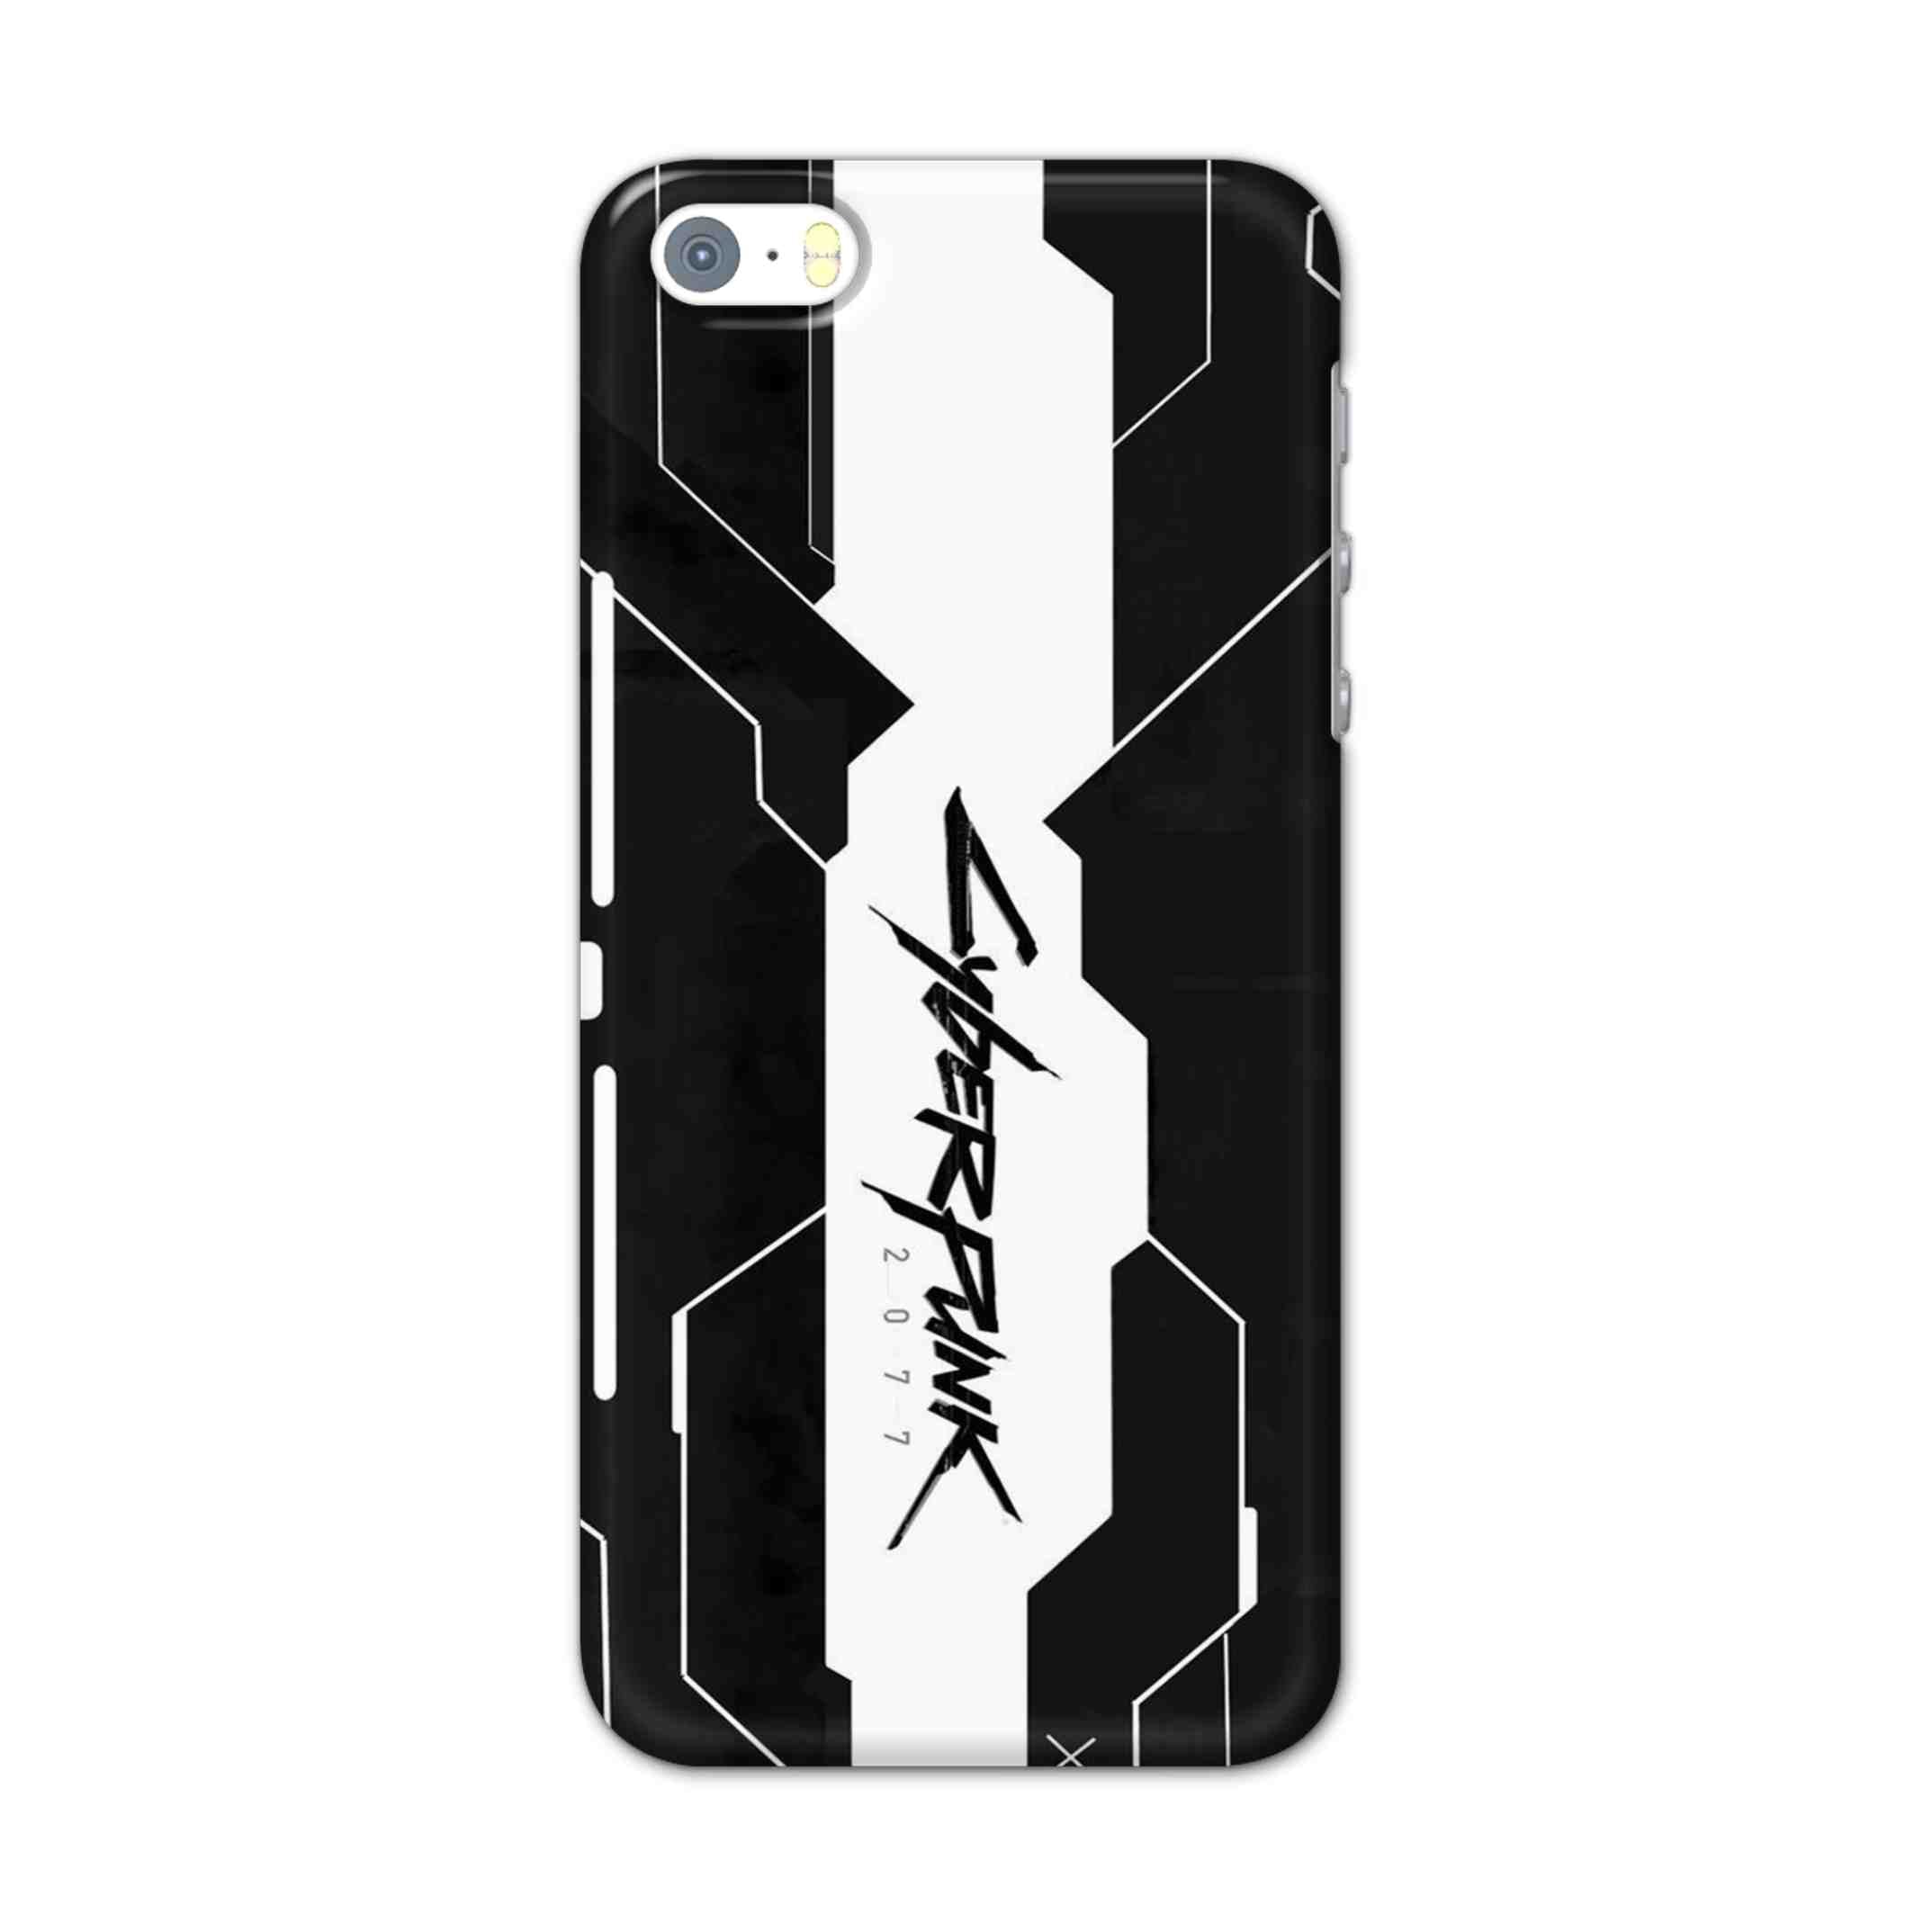 Buy Cyberpunk 2077 Art Hard Back Mobile Phone Case/Cover For Apple Iphone SE Online